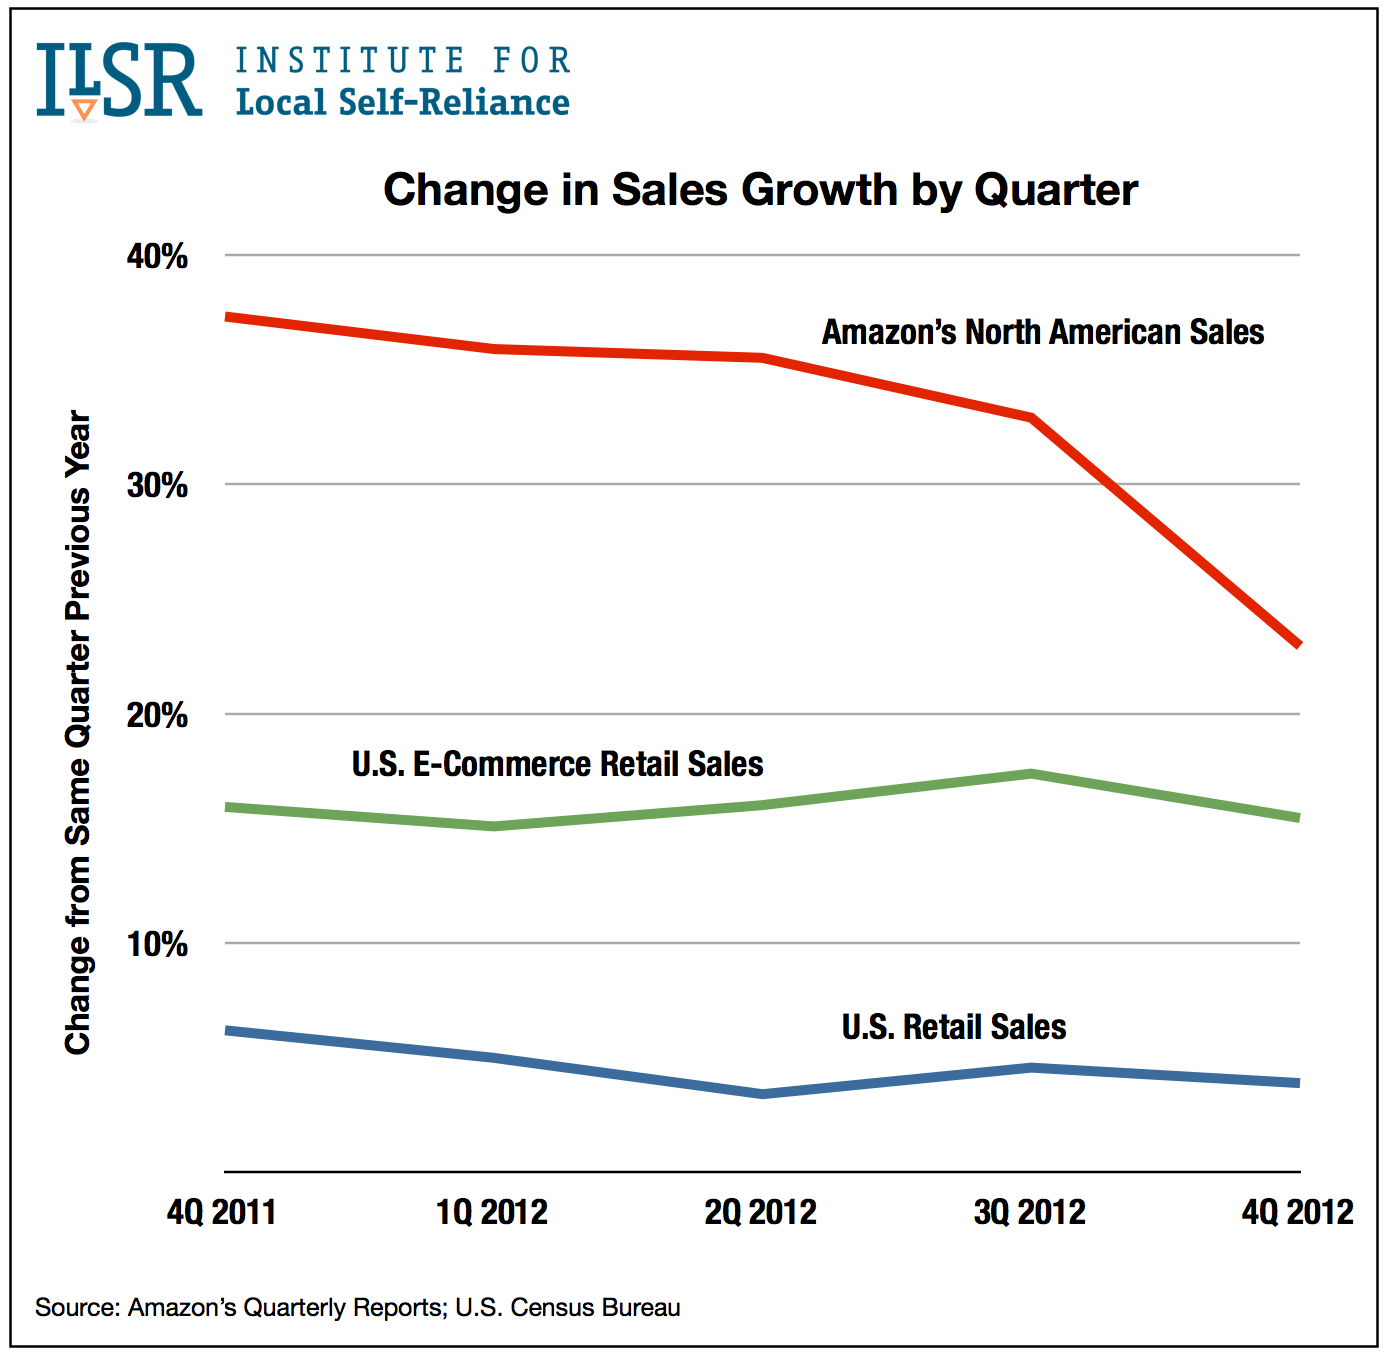 Graph: Quarterly Sales Growth for Amazon and U.S. Retail Sales